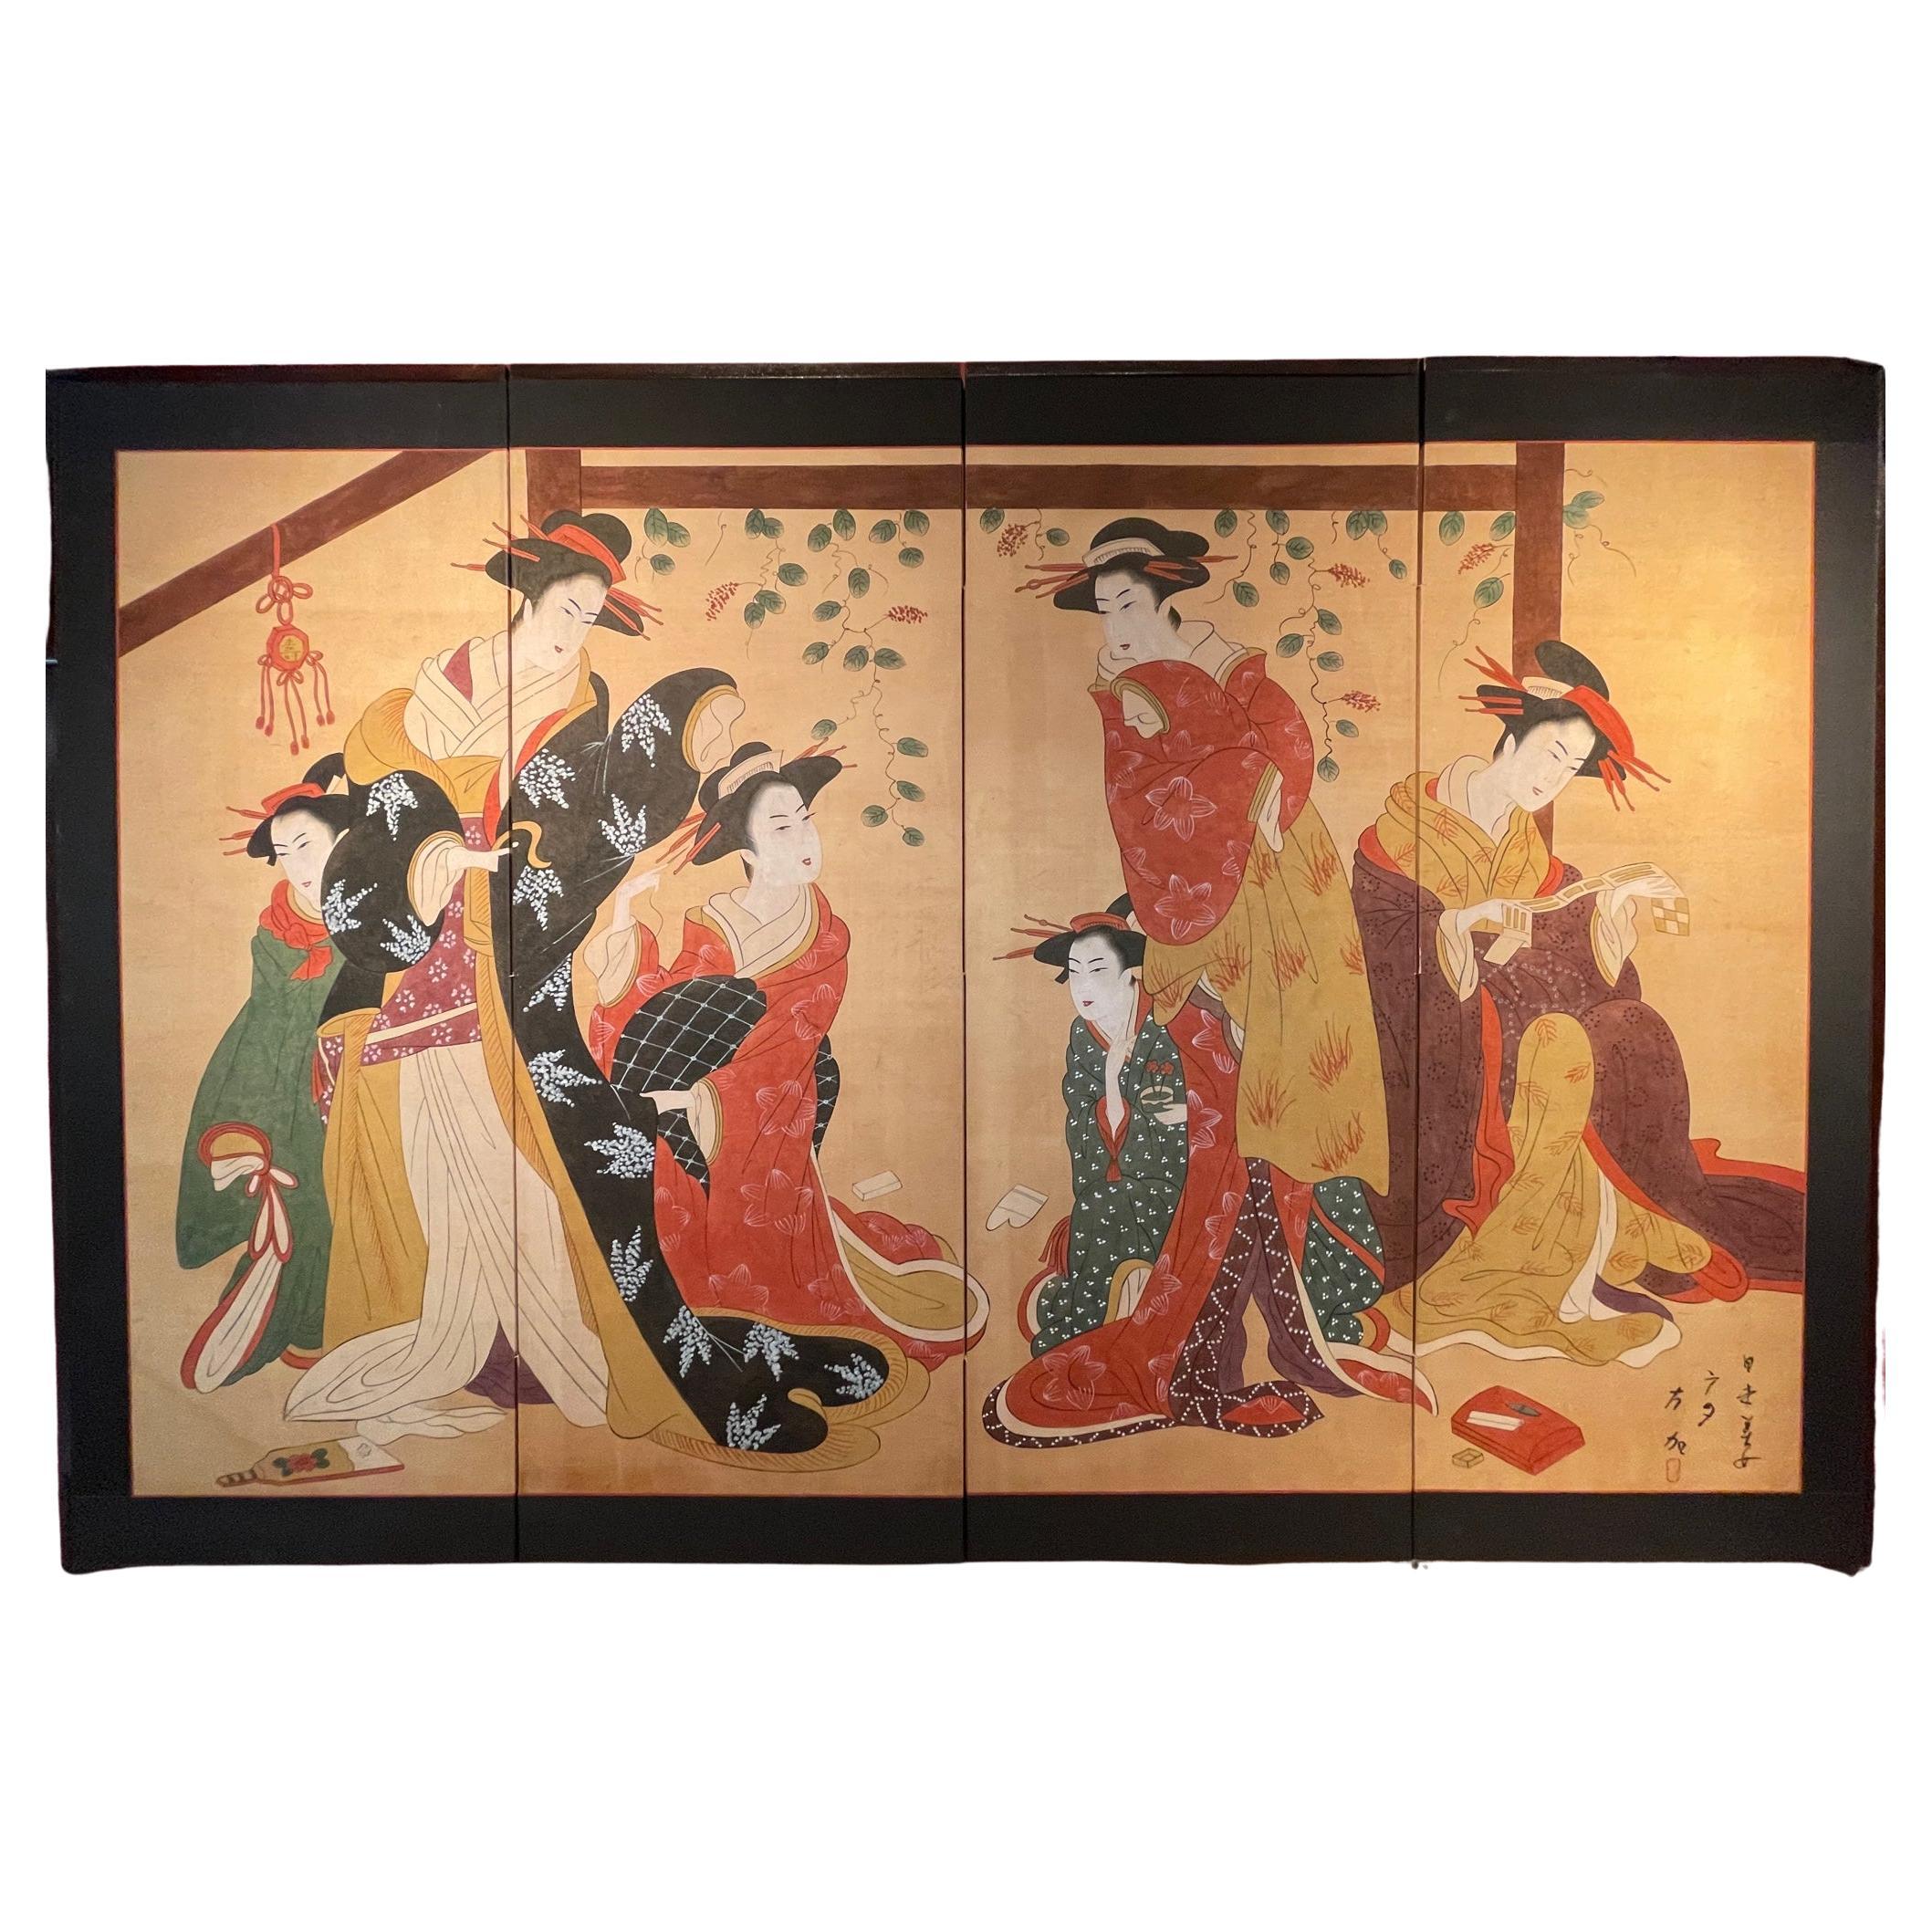  “4 Panels Screen with 6 Geishas Painted in the Ukiyo-e Style